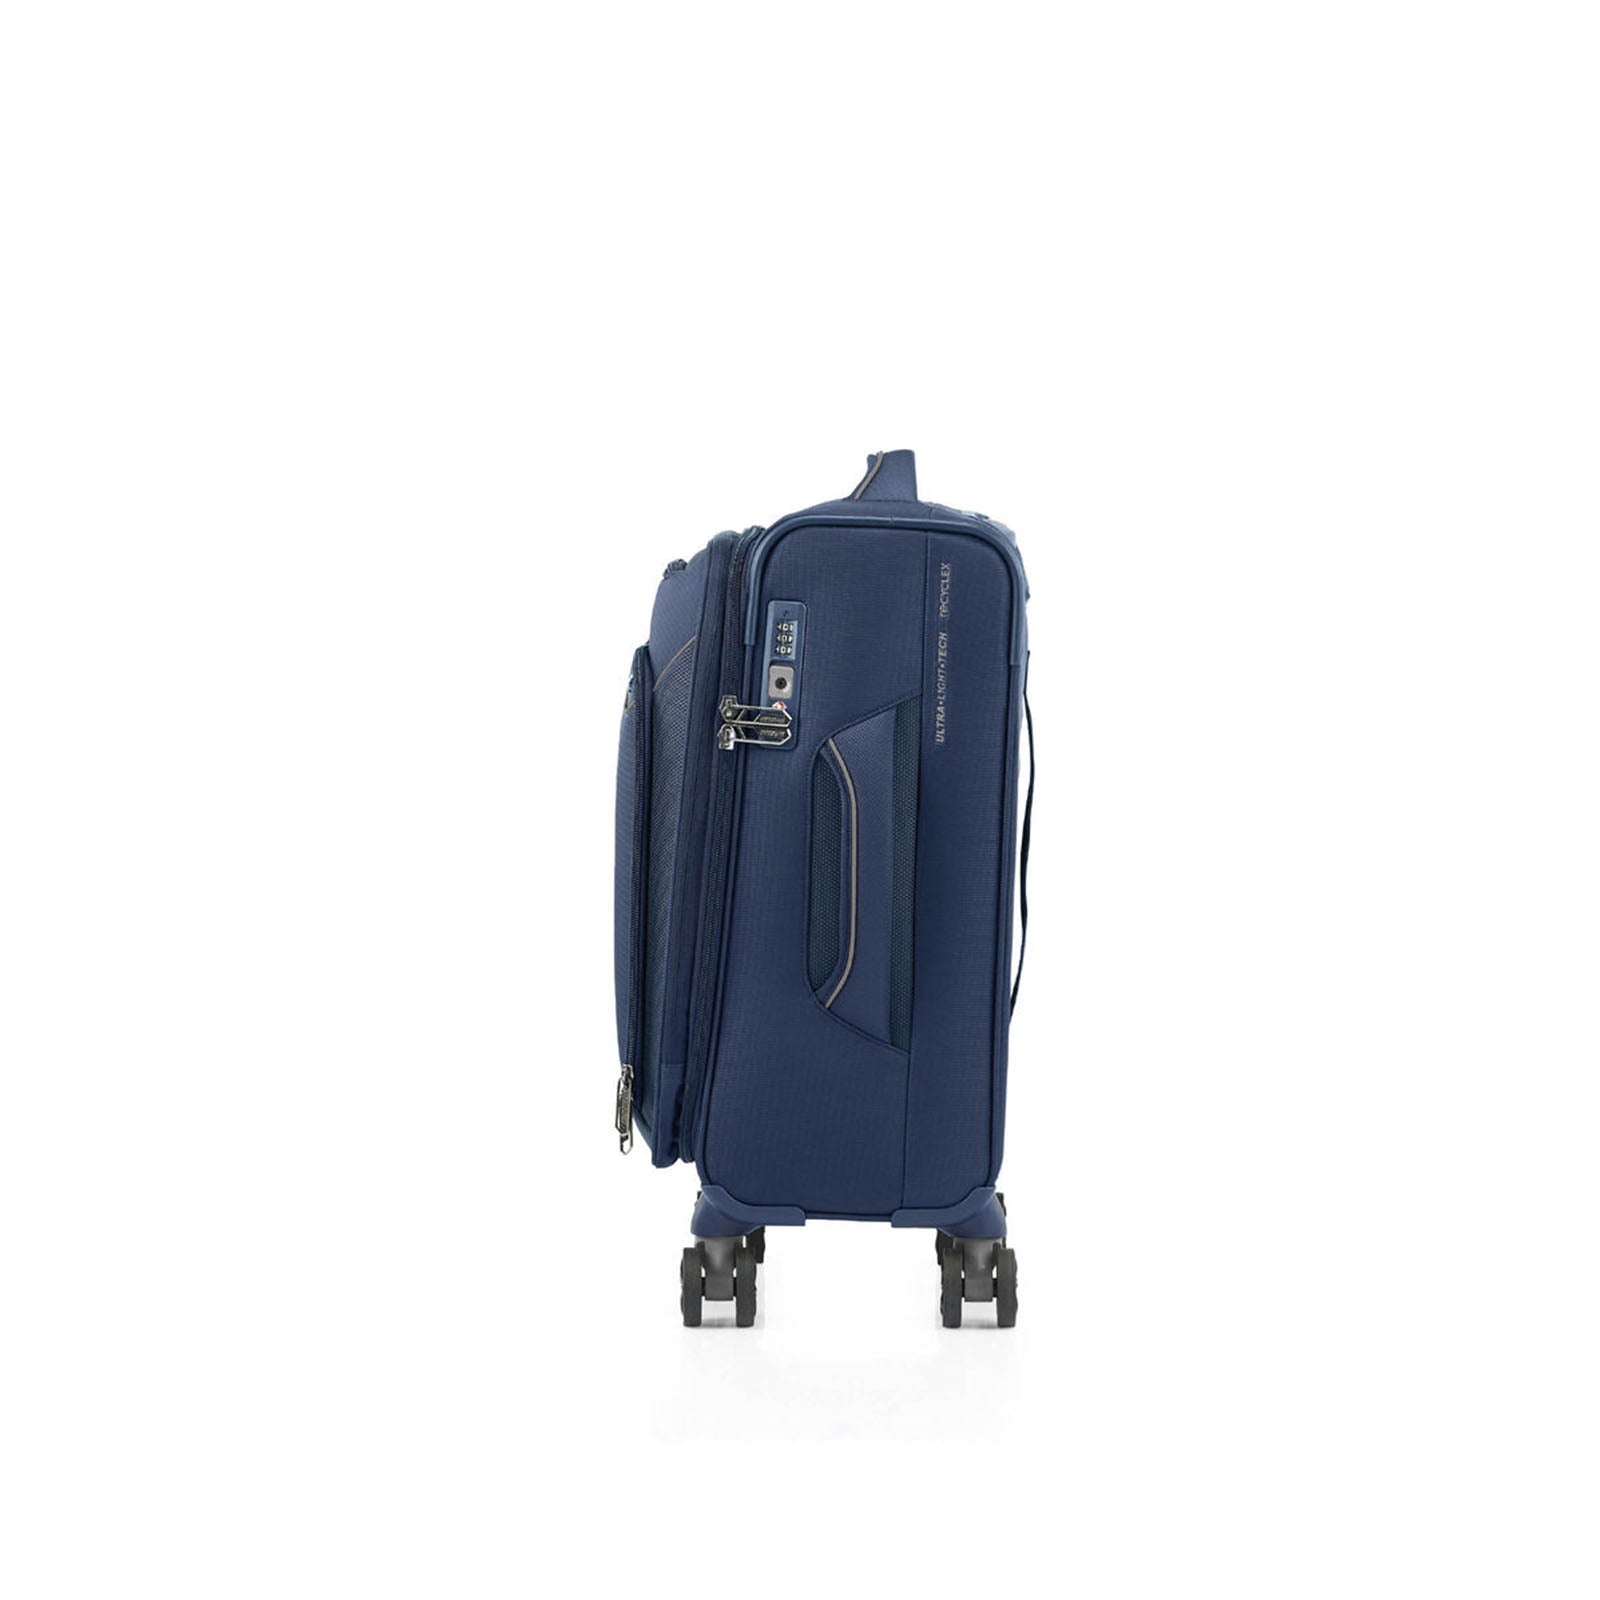 American-Tourister-Applite-4-Eco-55cm-Carry-On-Suitcase-Navy-Lock